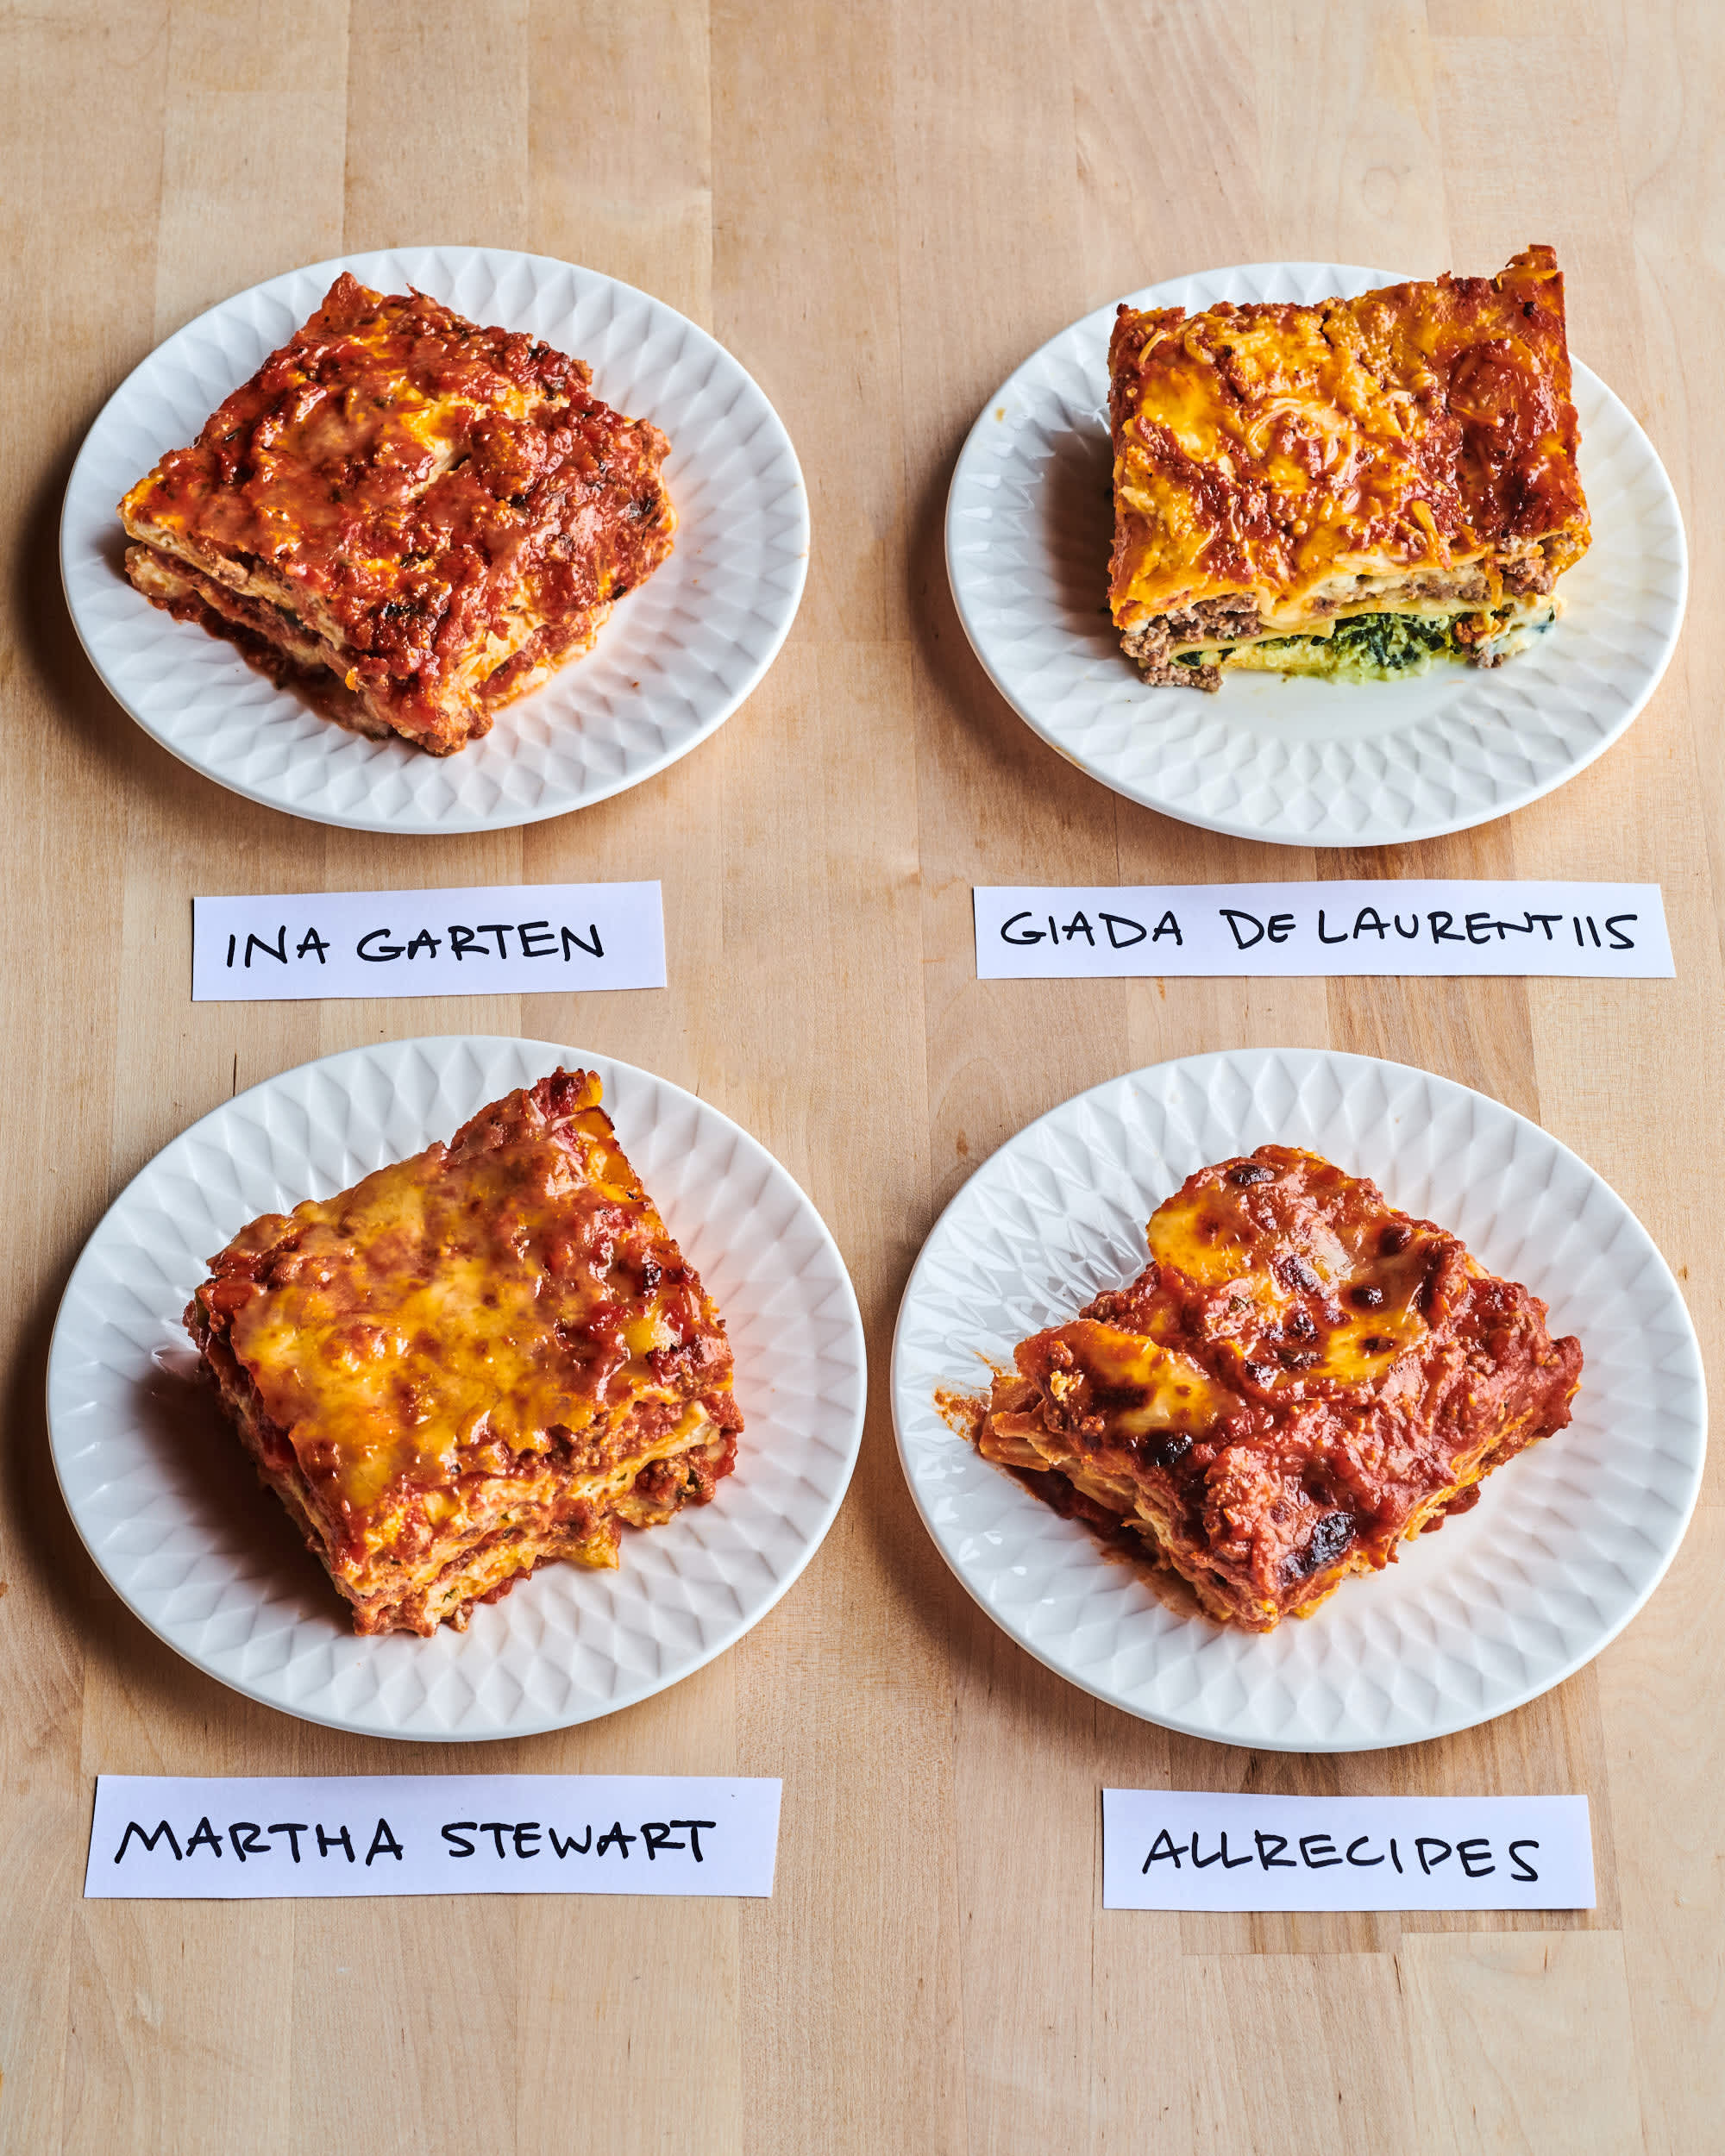 We Tried 4 Famous Lasagna Recipes - Here's the Best | Kitchn